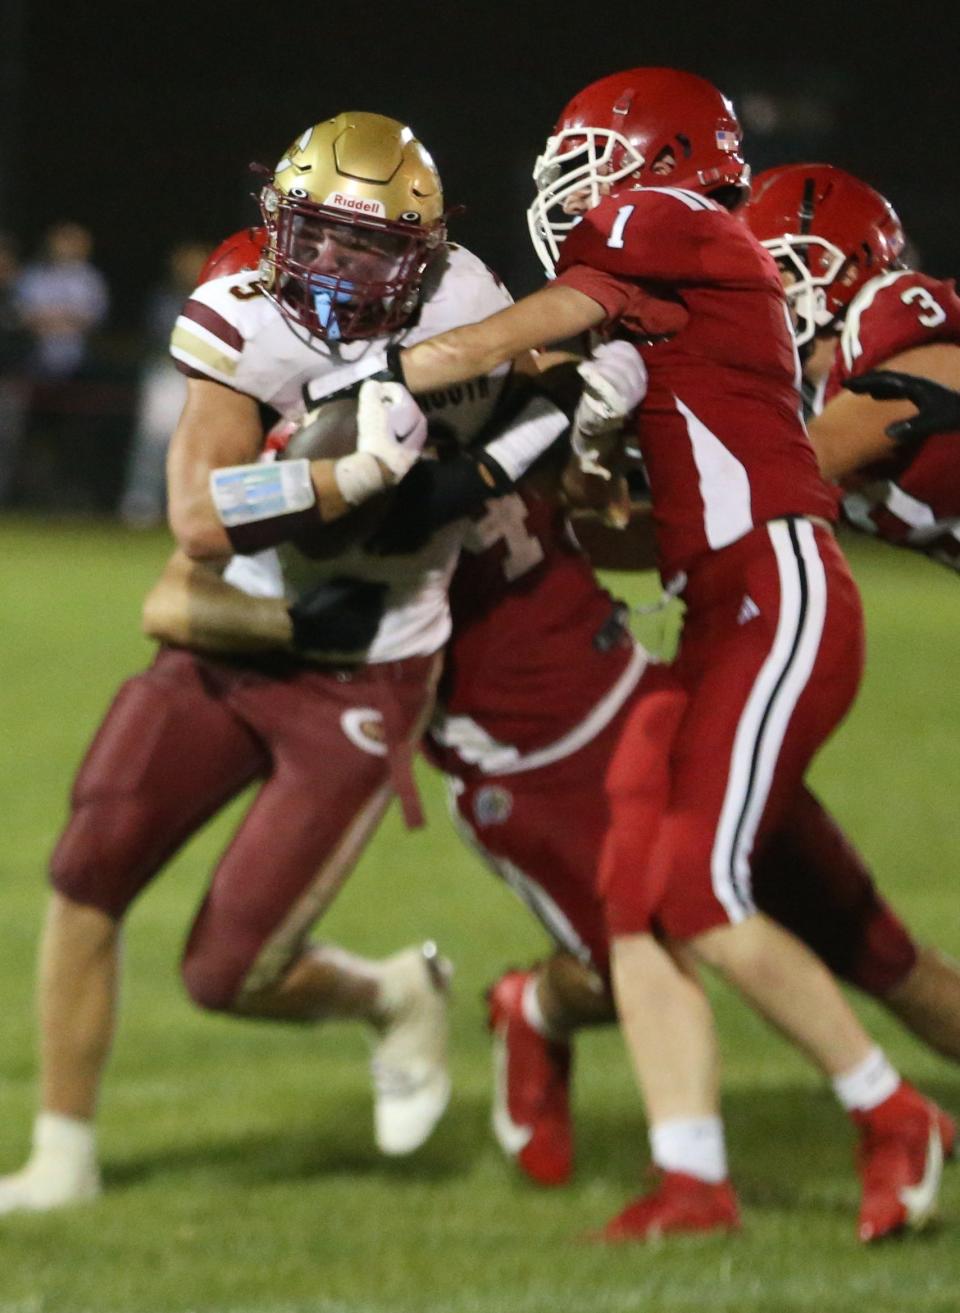 Portsmouth High School running back Brooks Connors ran for close to 130 yards in last Friday's season-opening win over Spaulding. On Friday, Connors will play against his former team, Winnacunnet, at Tom Daubney Field in Portsmouth. Kickoff is scheduled for 7 p.m.